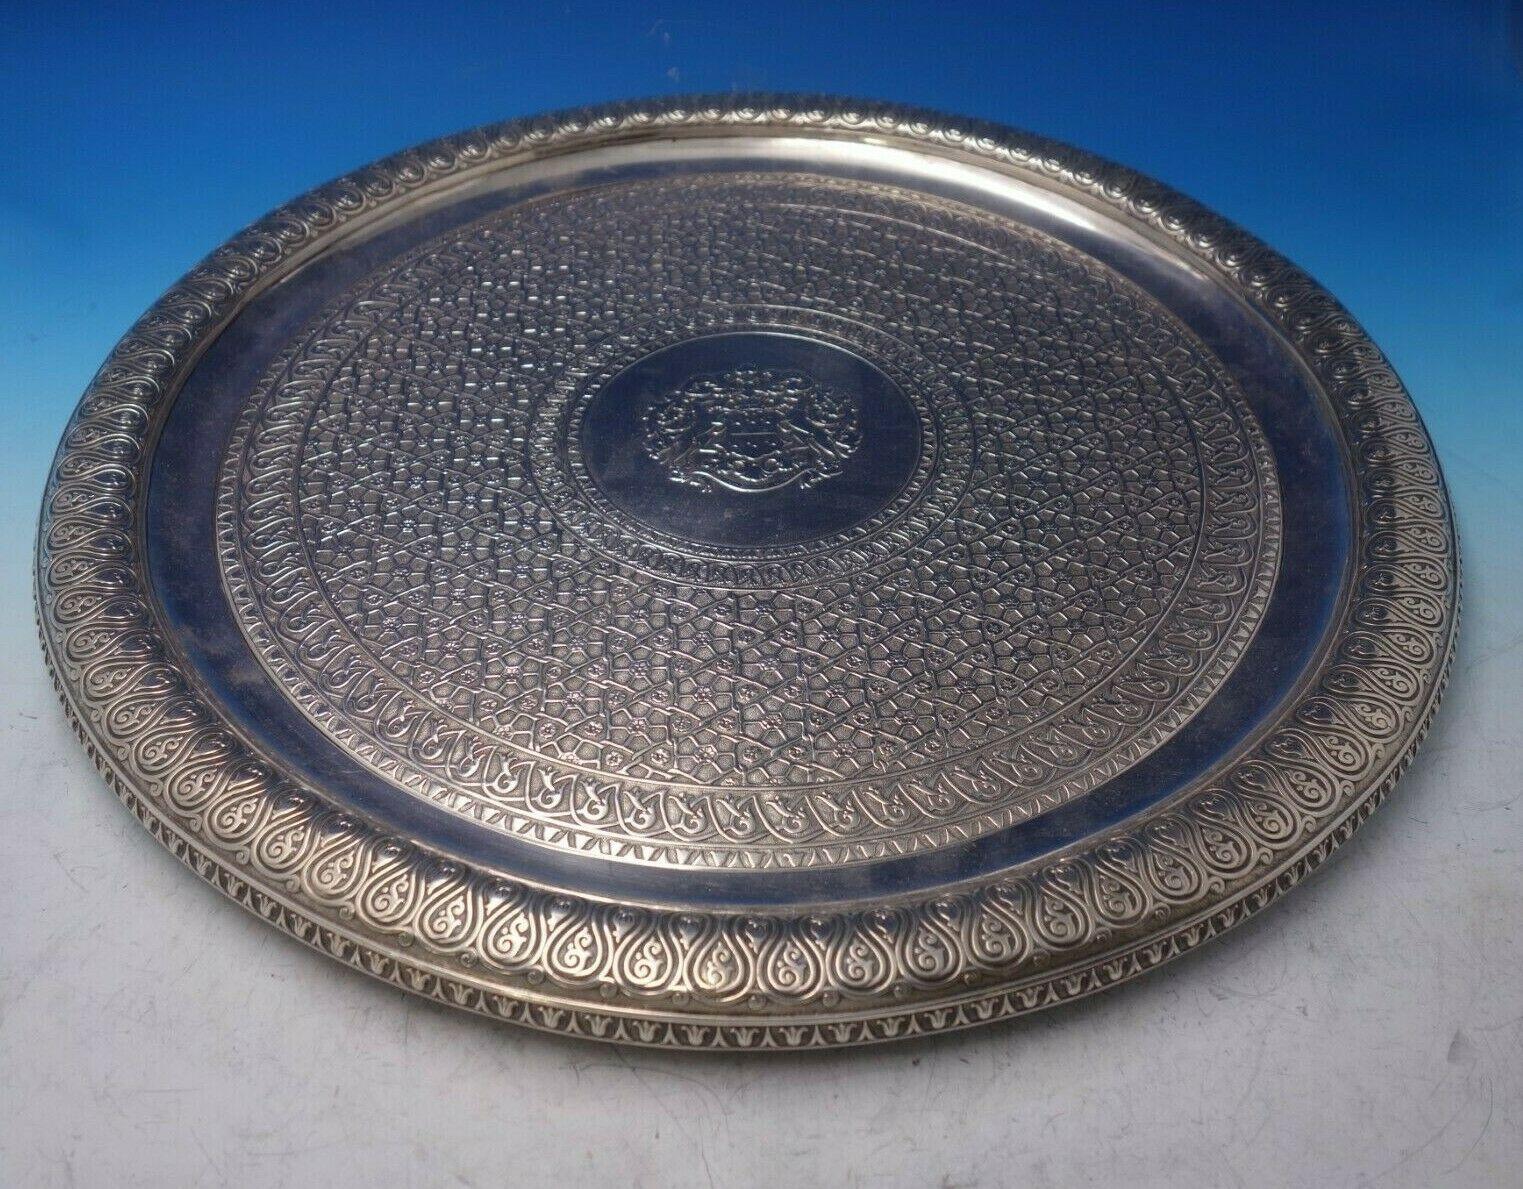 Paul Storr

Extraordinary Paul Storr English Victorian sterling silver round tray engraved #122. This tray was made in London circa 1837. This piece features a detailed chased coat of arms in the center with a pair of whippet dogs, and has an